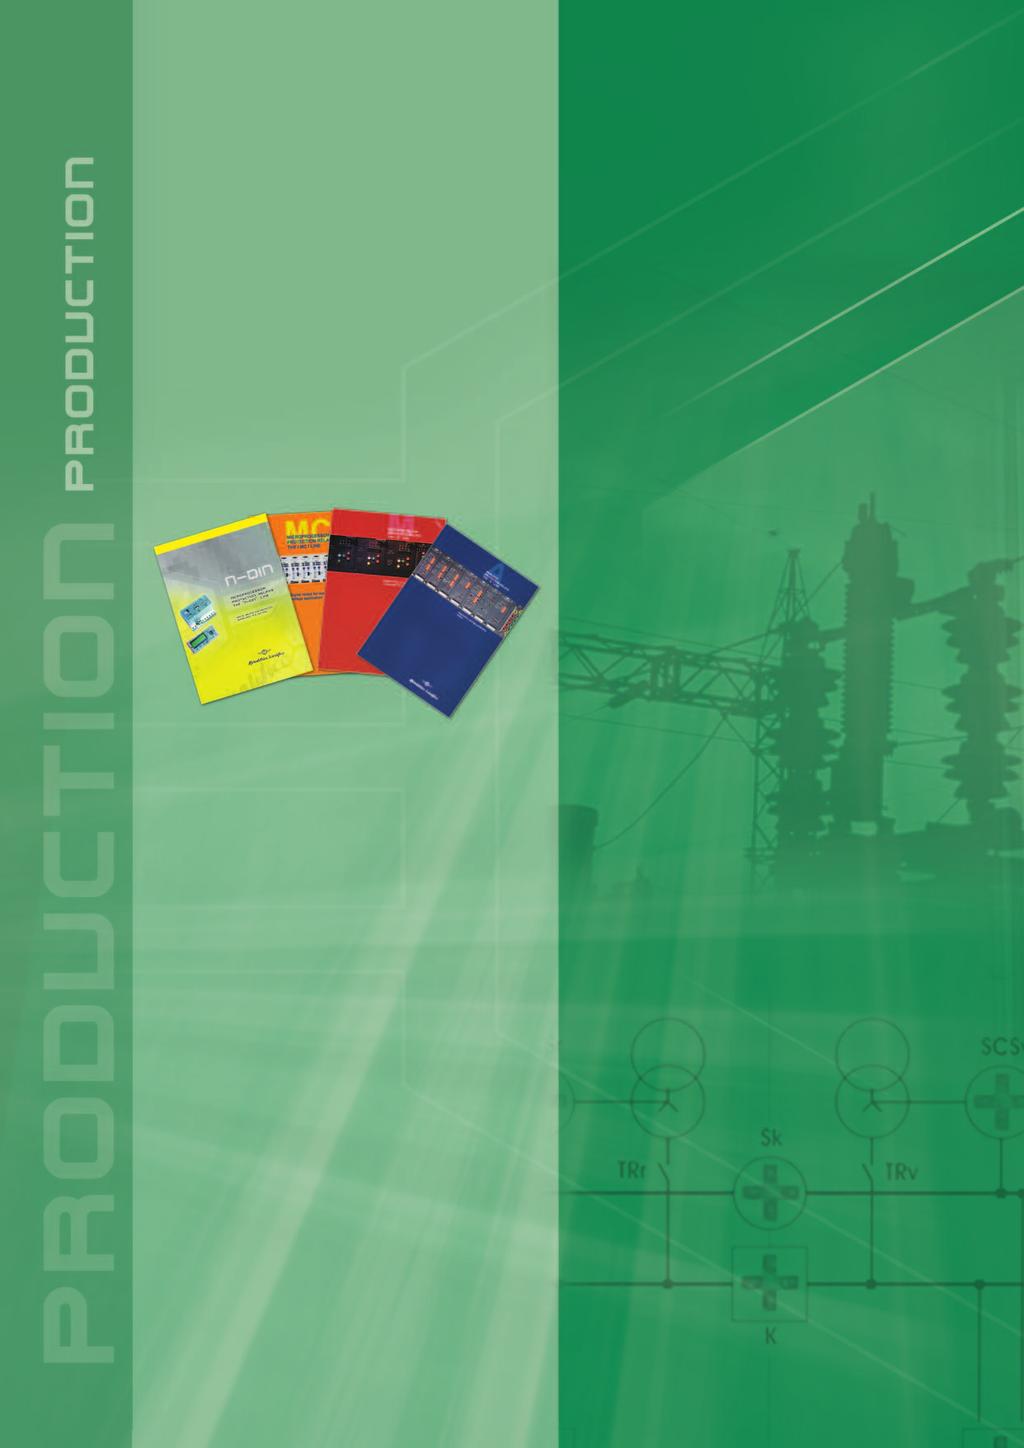 Founded in 1953, Microelettrica Scientifica has developed a wide range of products, divided into three main lines: Electronic Relays: For Transmission, Distribution and Machinery protection.